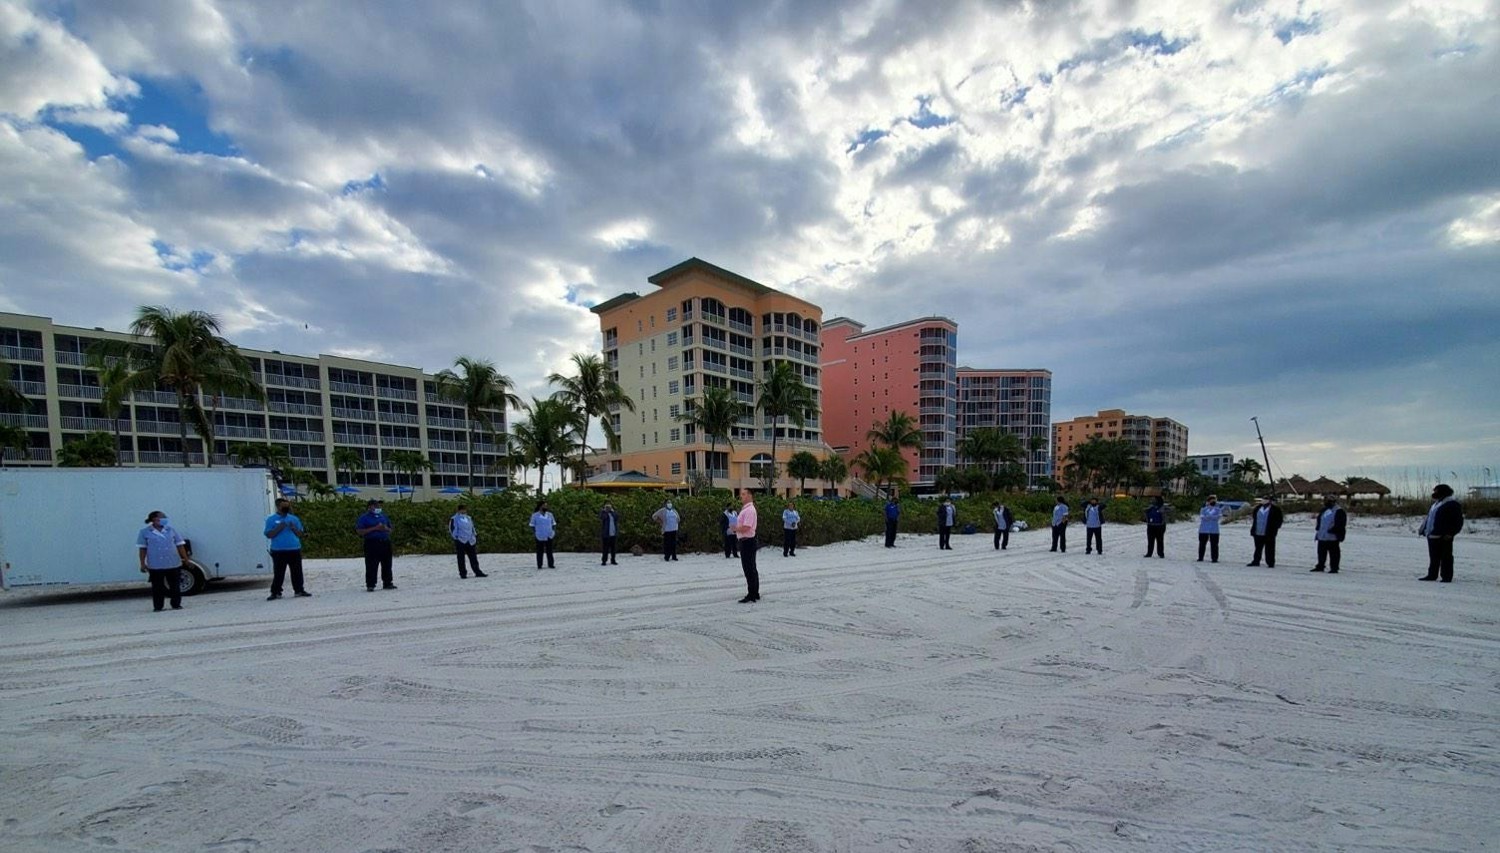 Housekeepers warming up with yoga on the beach.